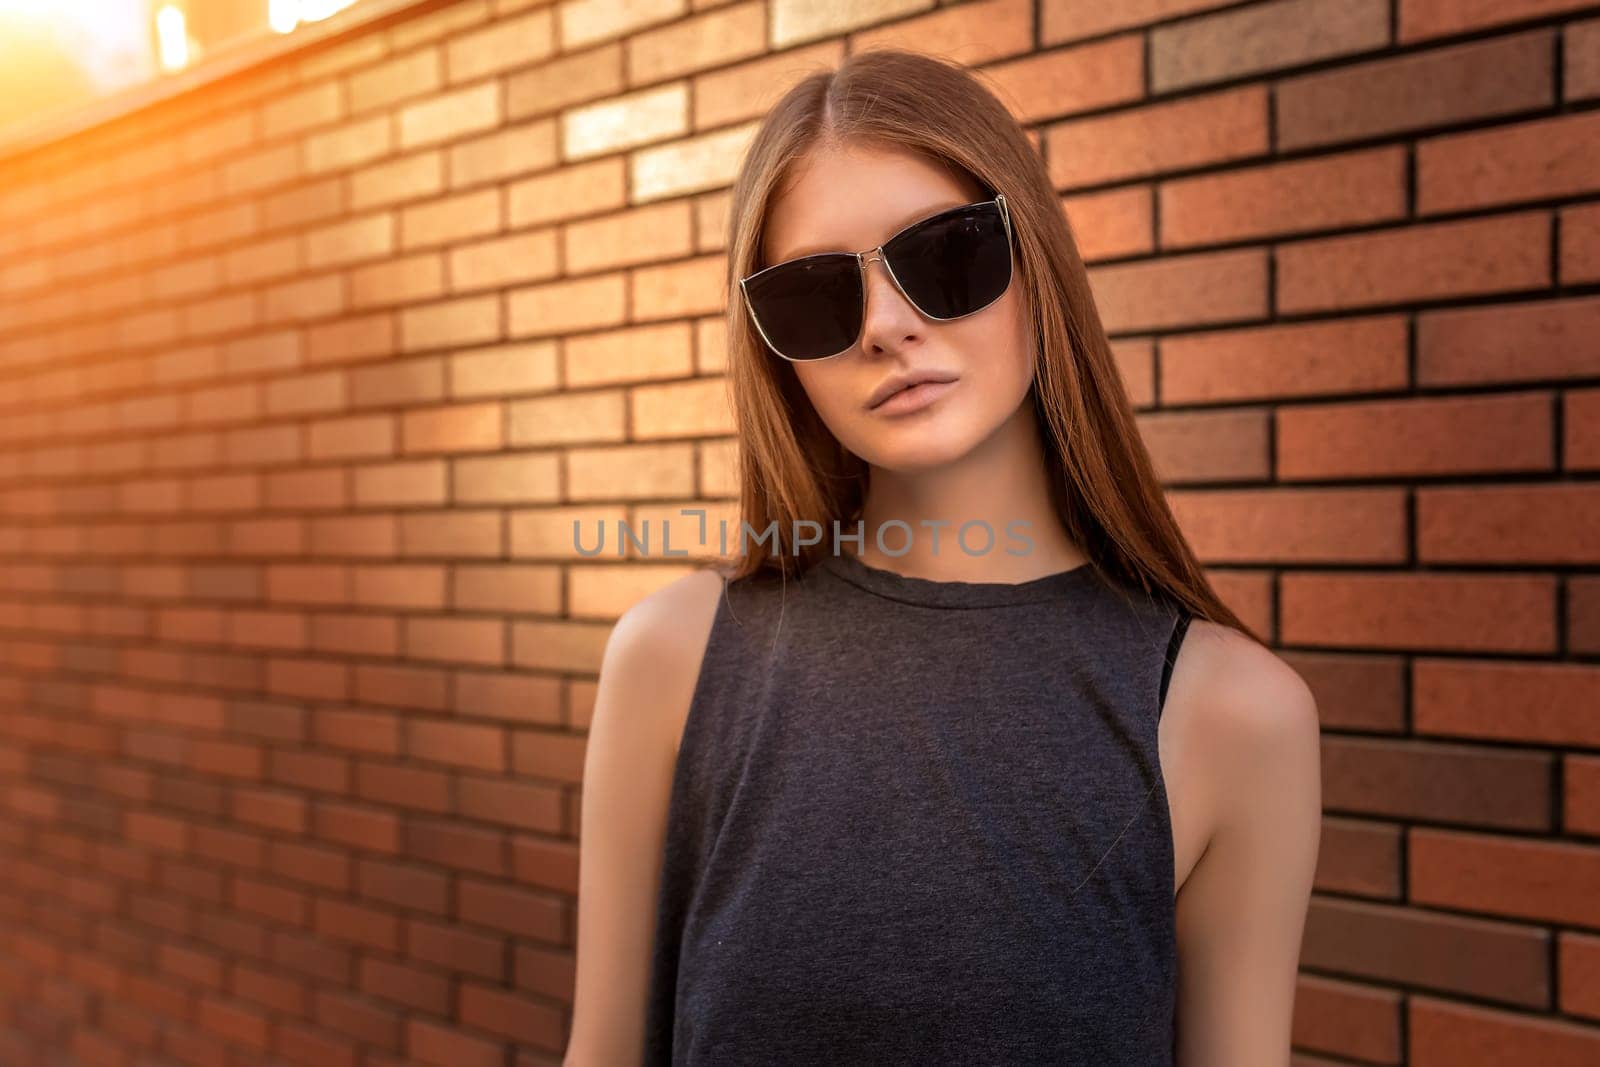 Portrait of Young Woman on Brick Wall Background. Trendy Urban Fashion Concept. Closeup